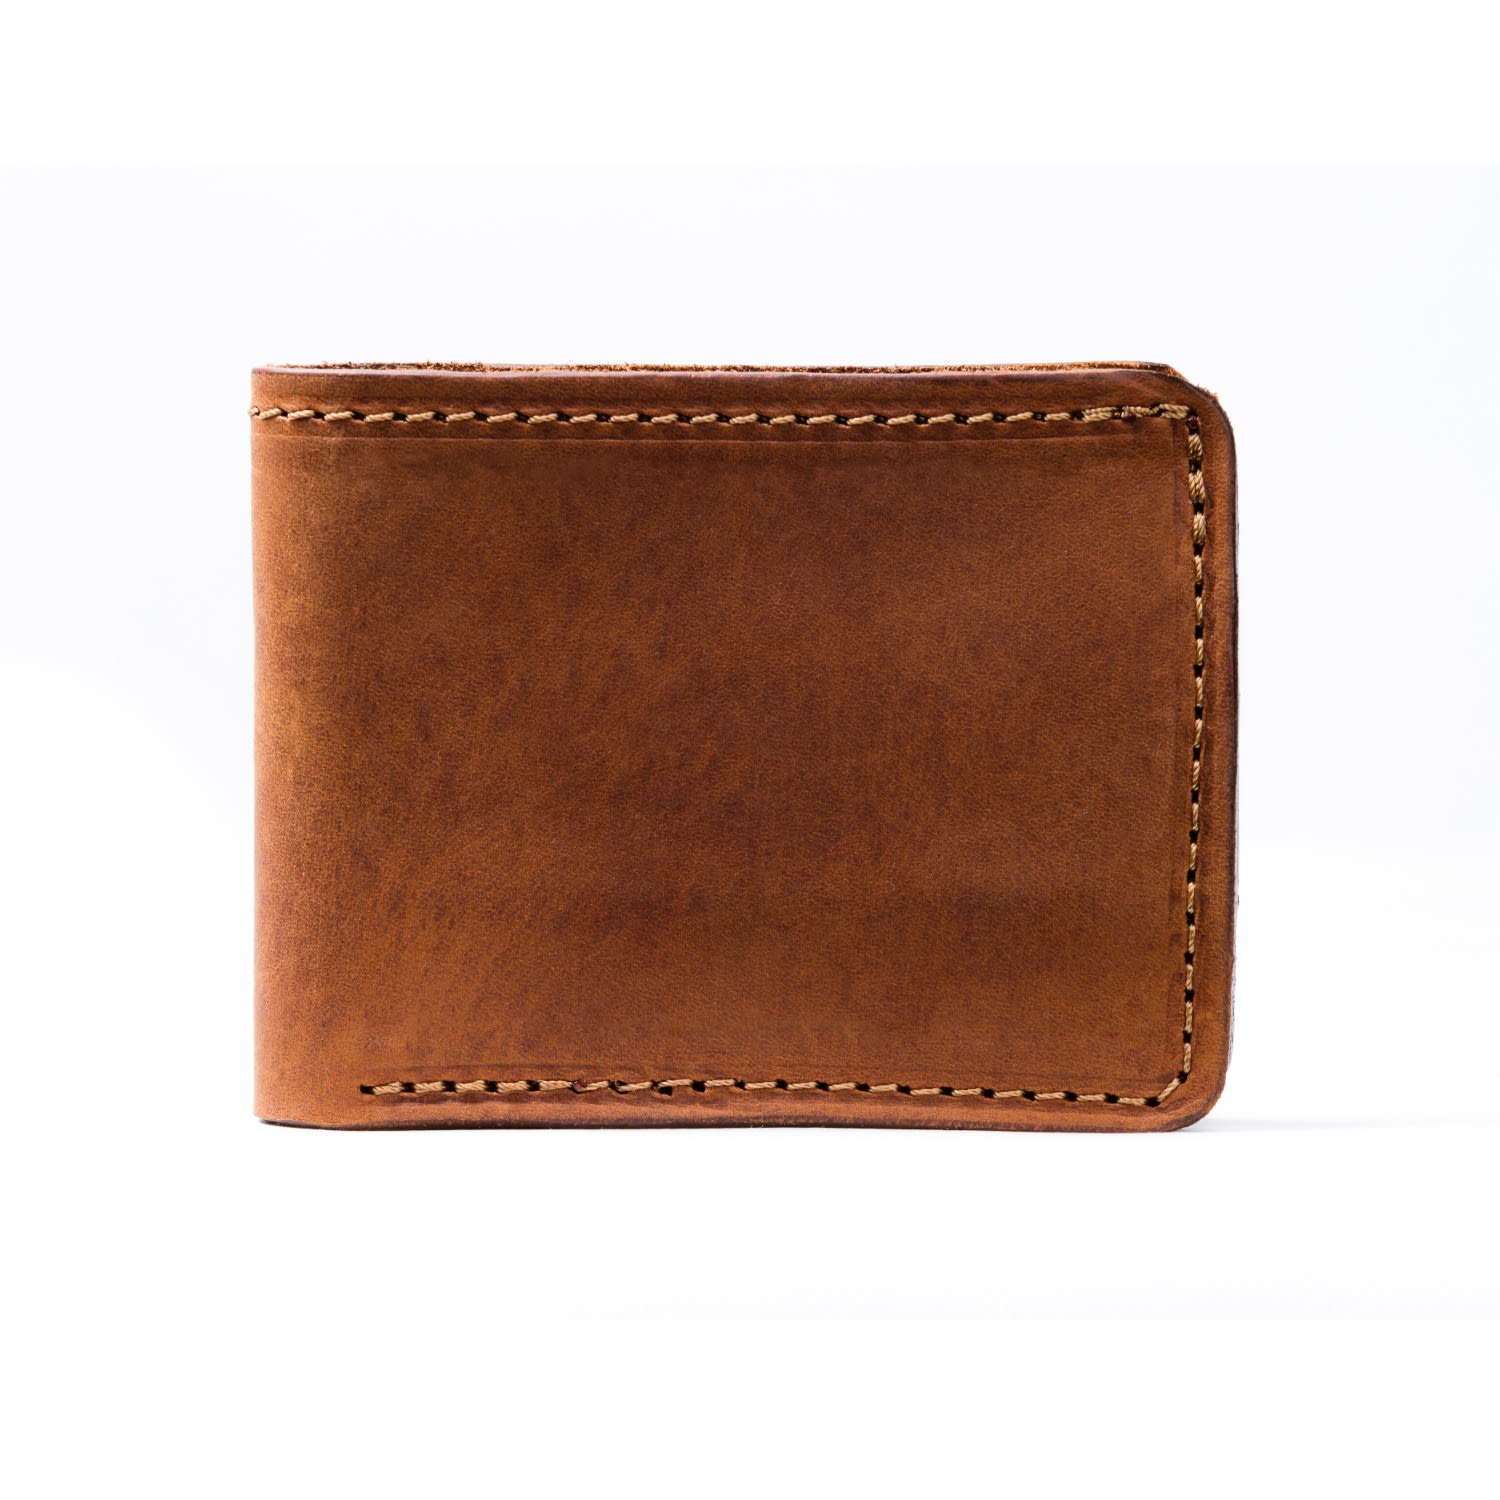 The Dust Company Men's Leather Wallet In Heritage Brown